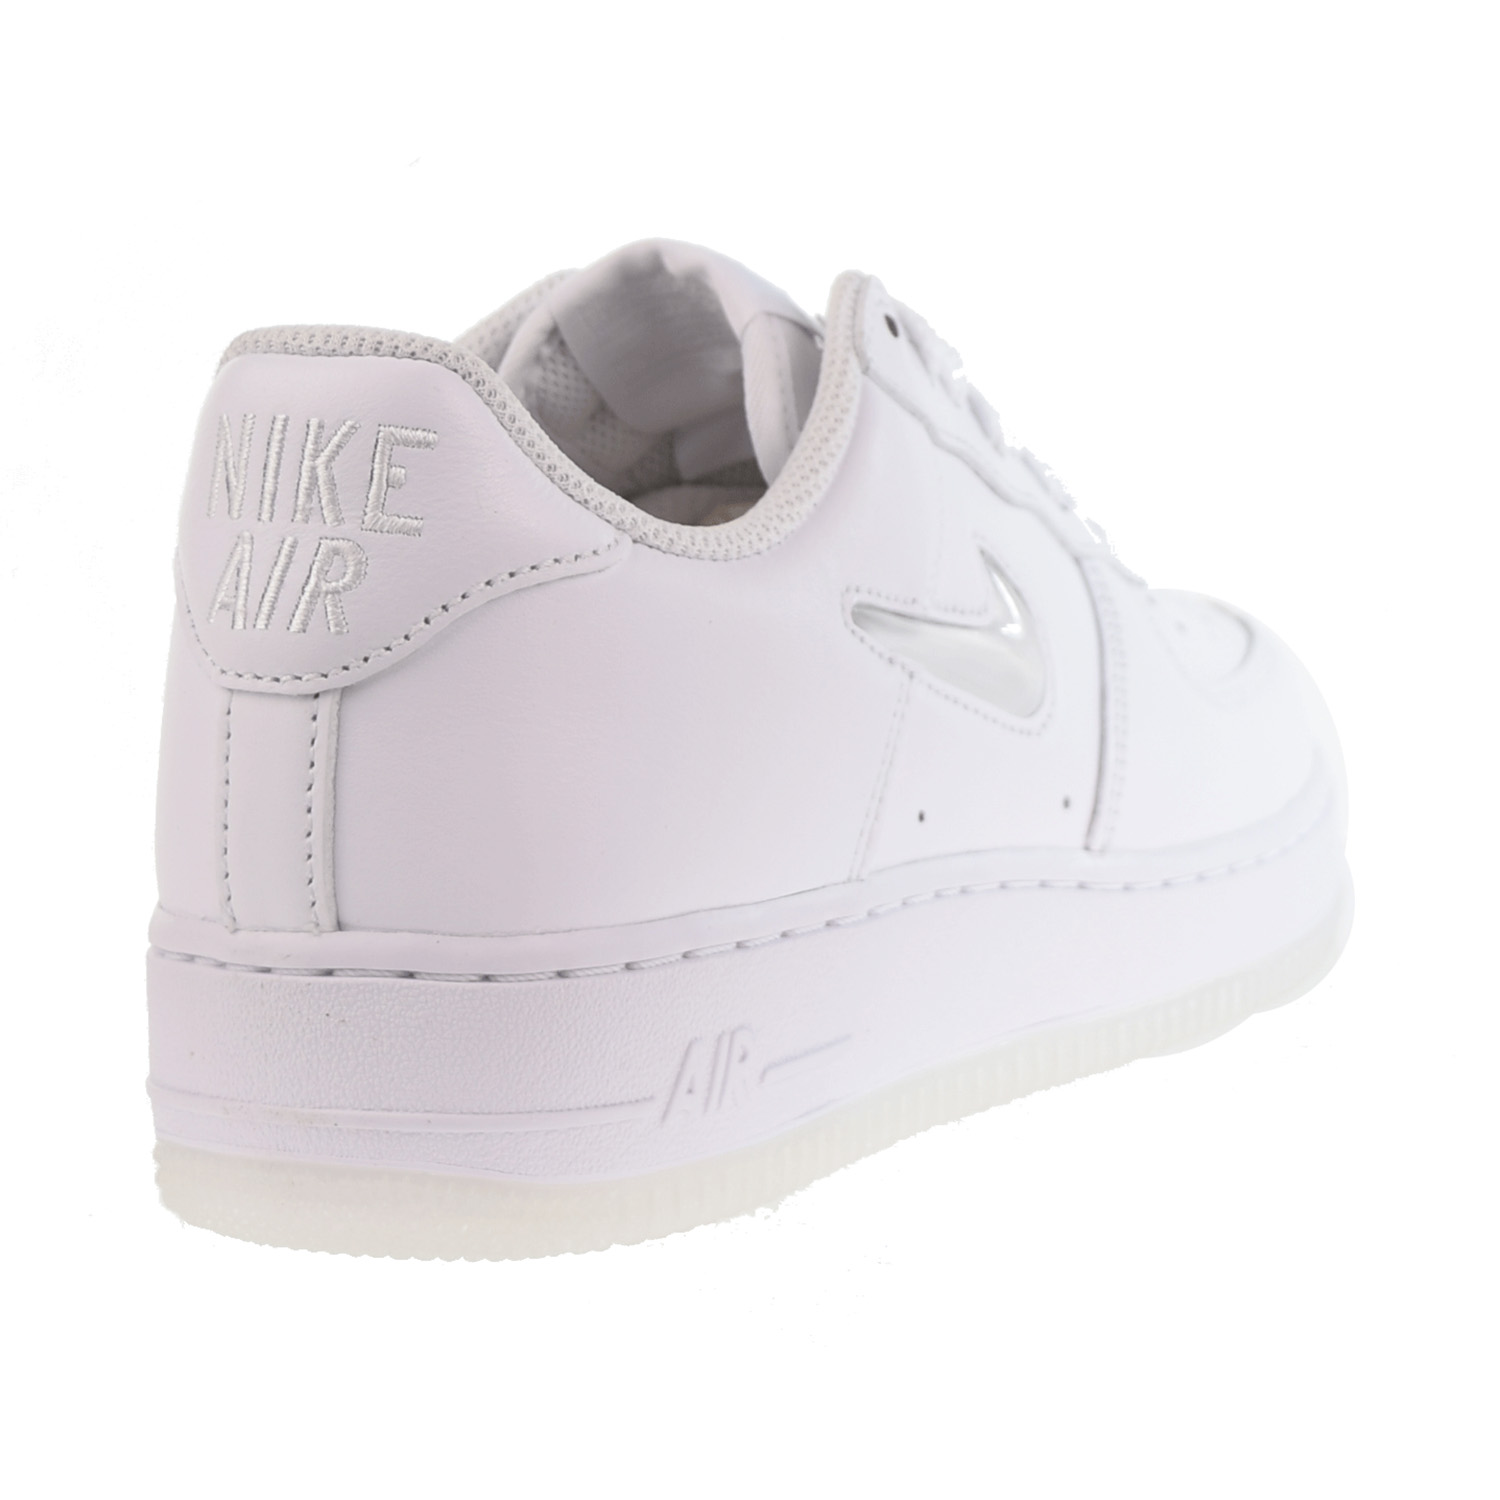 Nike Air Force 1 "Color of the Month" Men's Shoes White fn5924-100